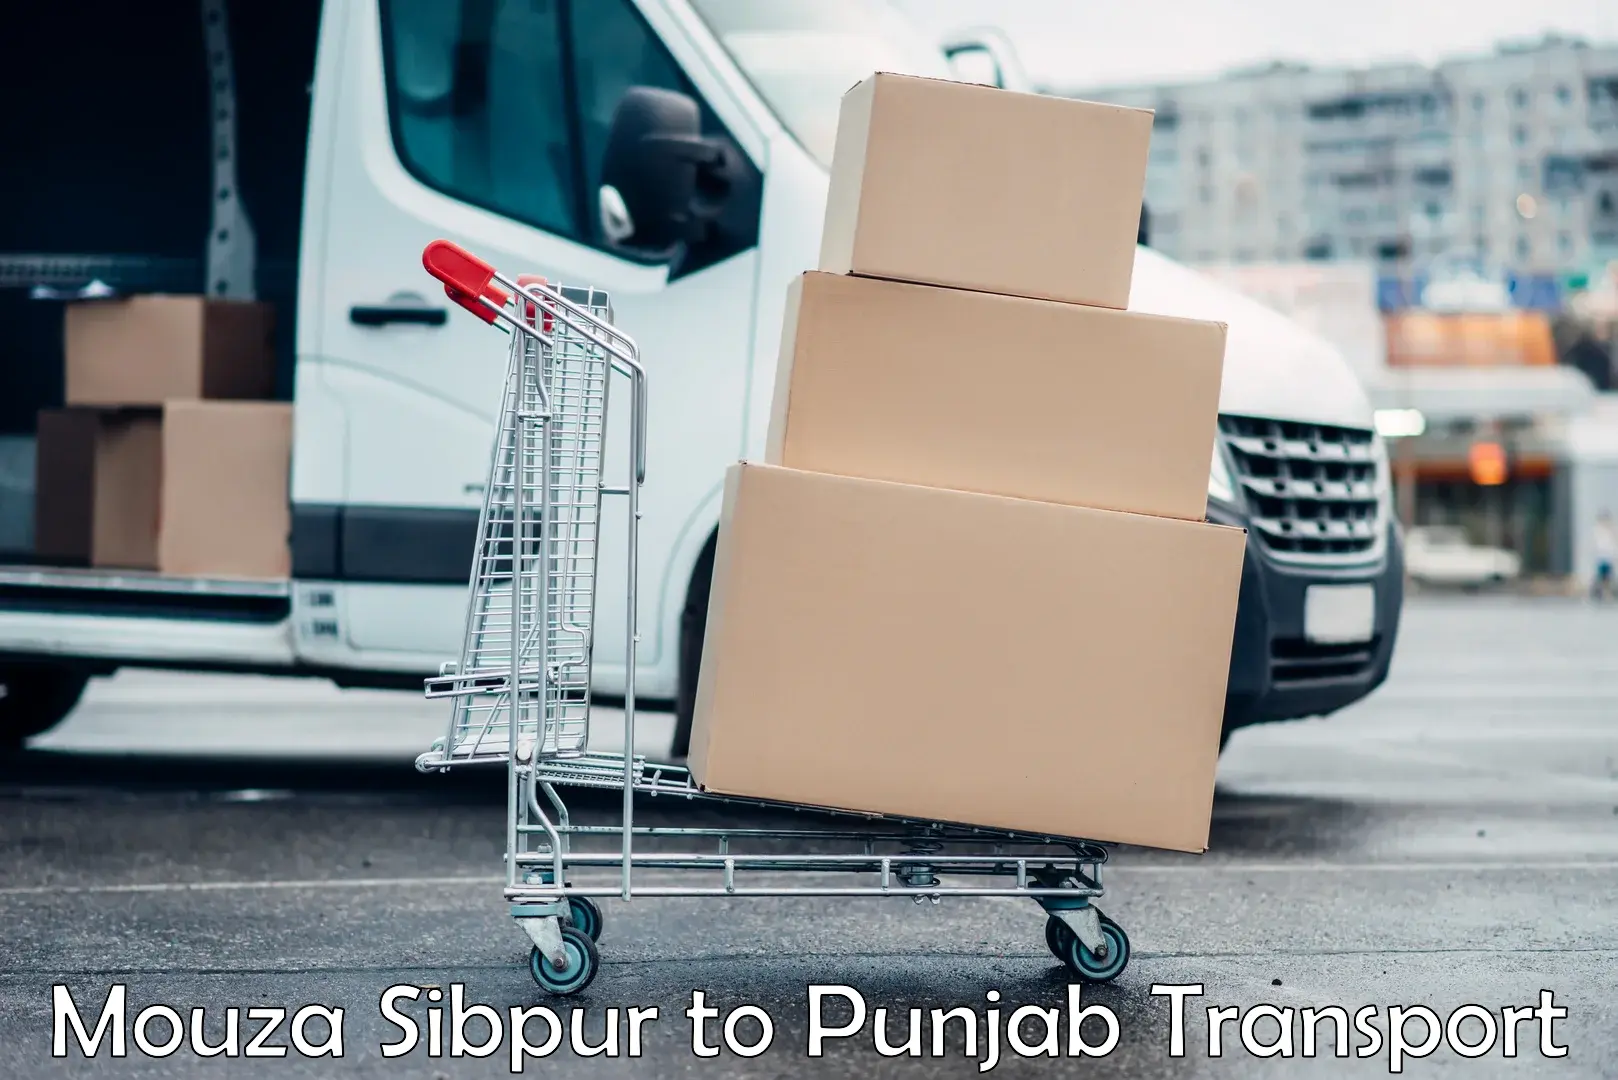 Goods delivery service Mouza Sibpur to Talwandi Sabo